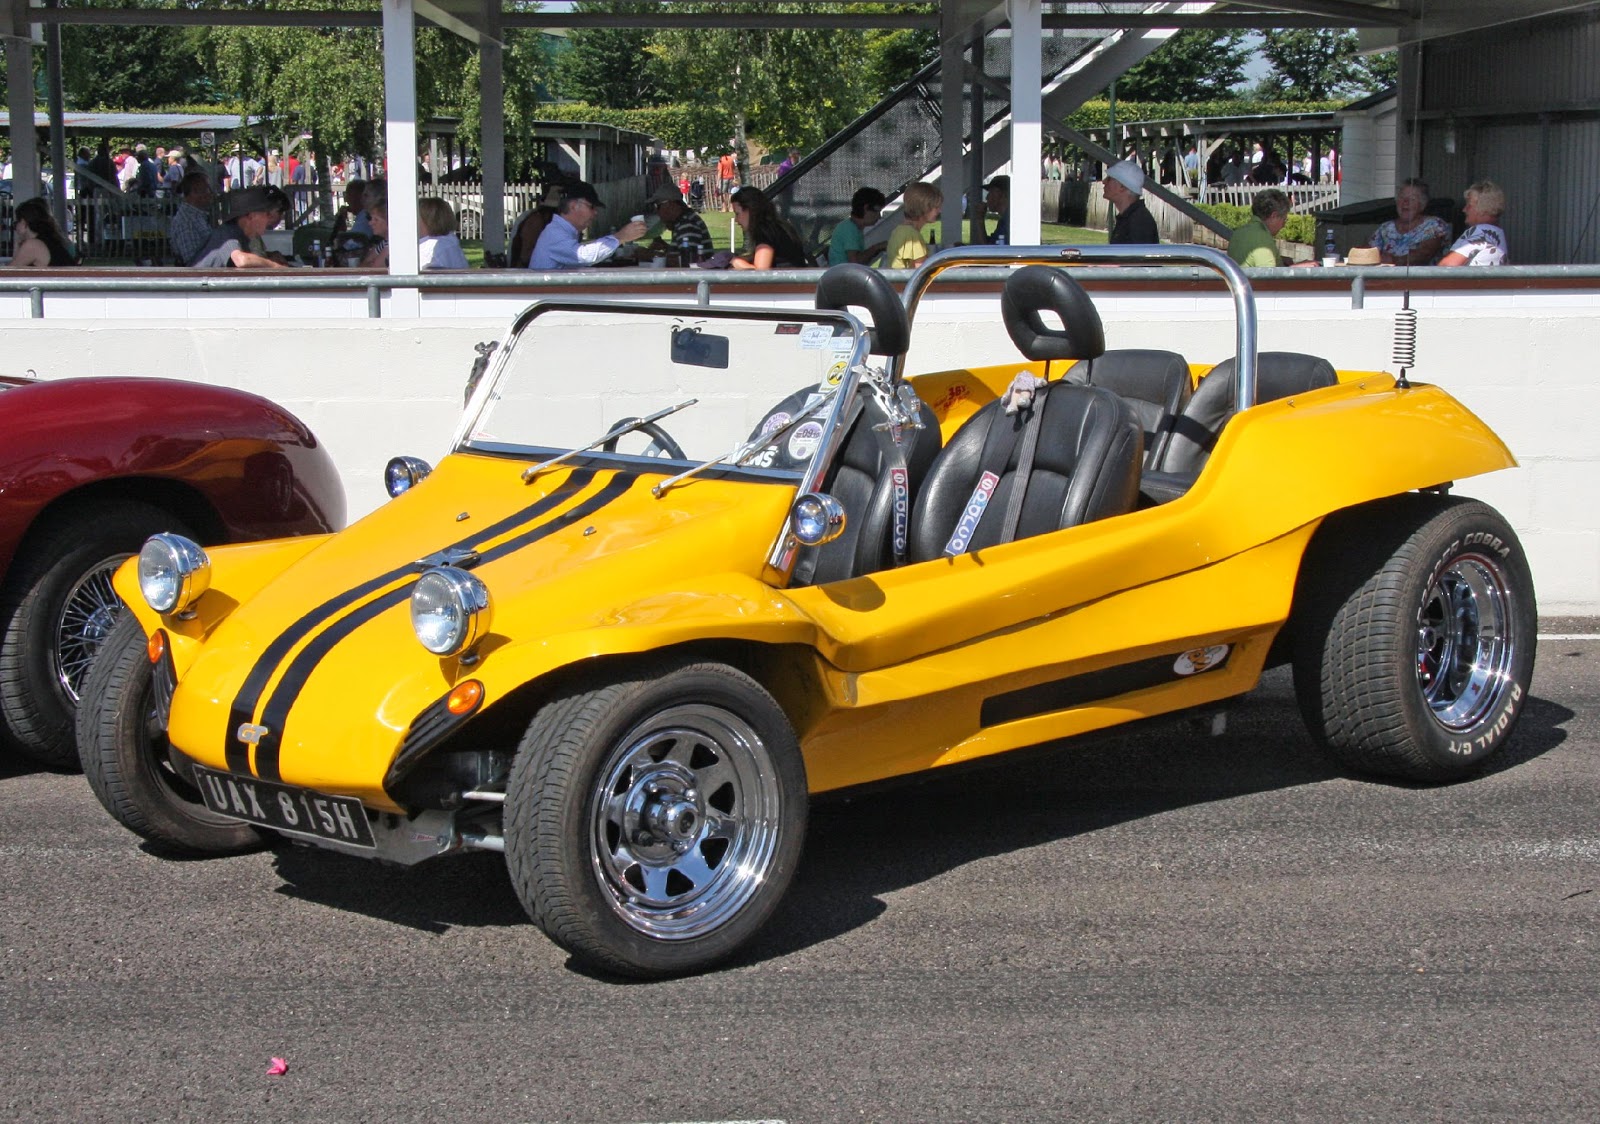 File:Beach buggy   Flickr   exfordy   Wikimedia Commons